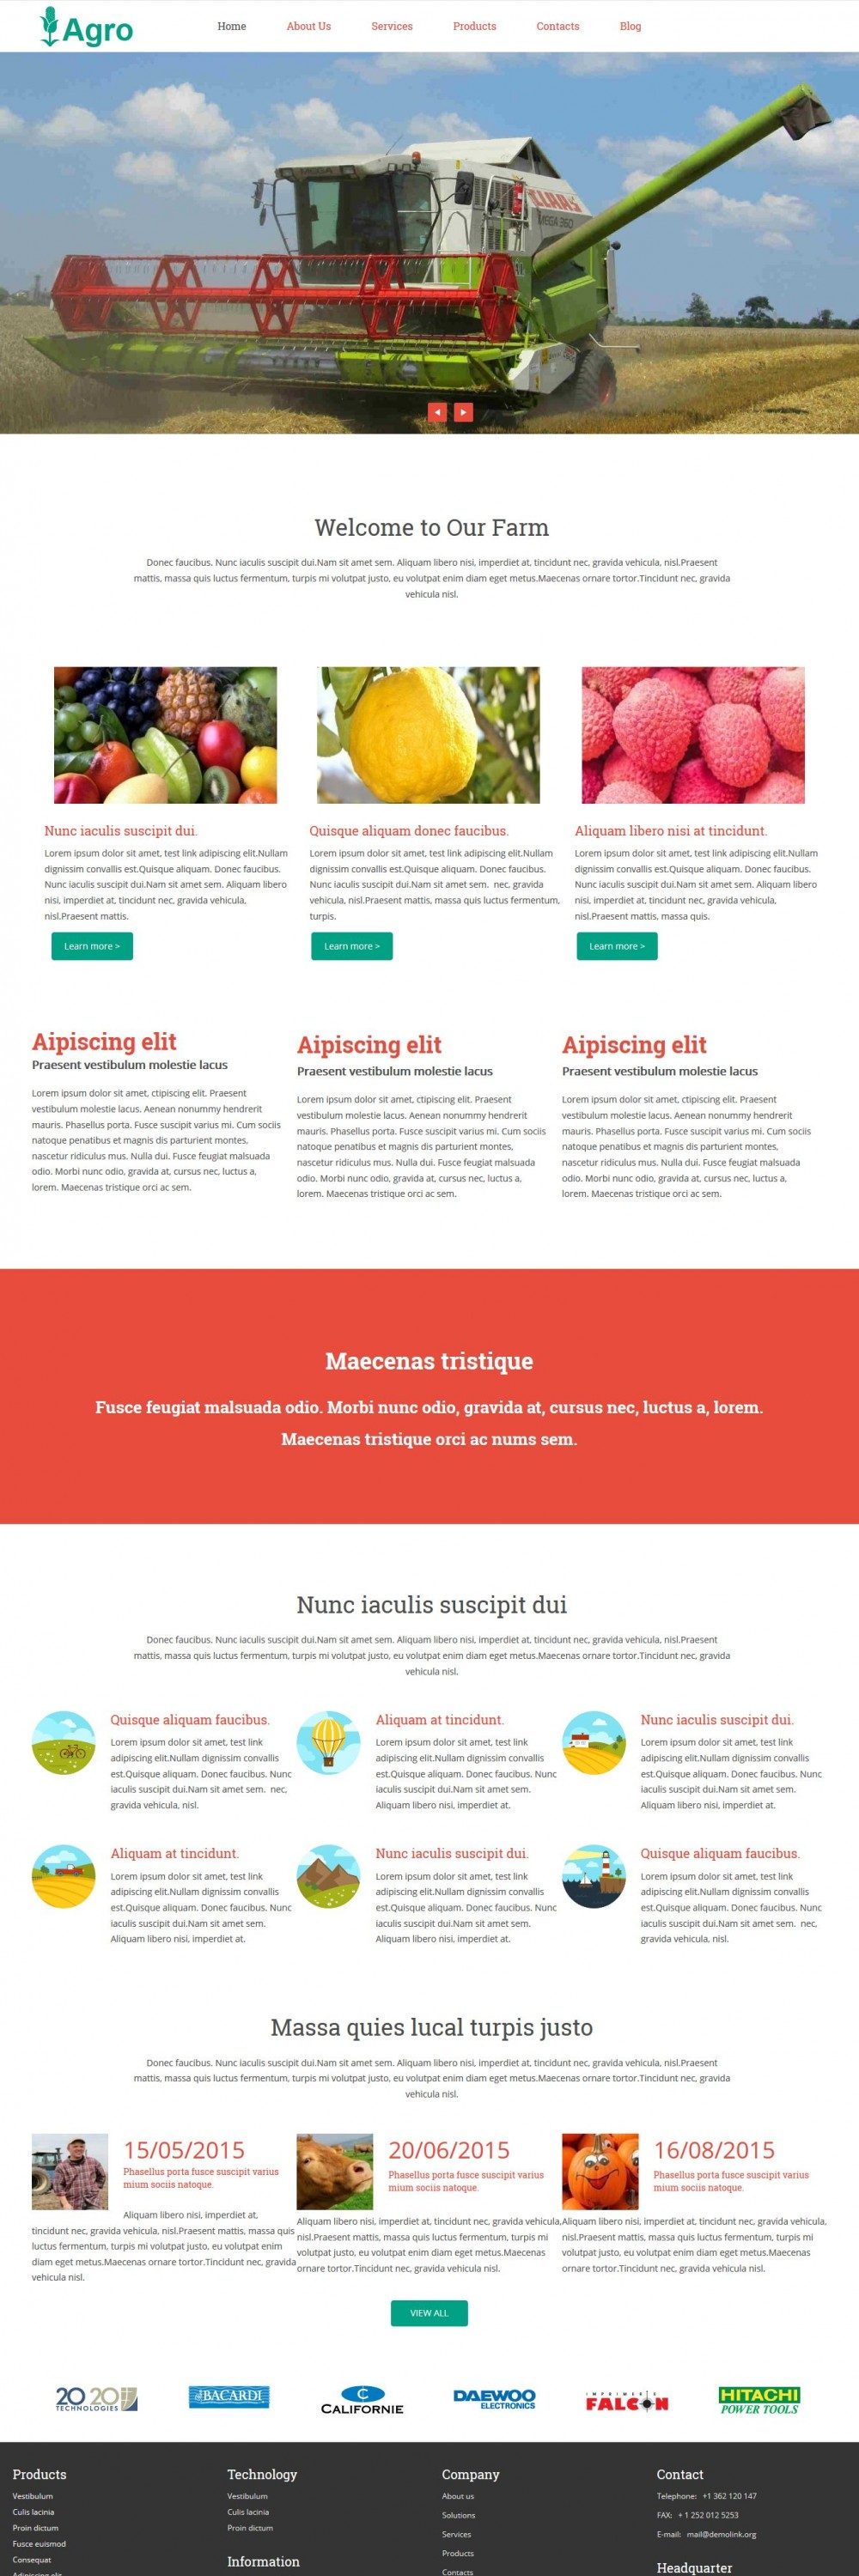 Agro free wordPress theme for farms and agriculture